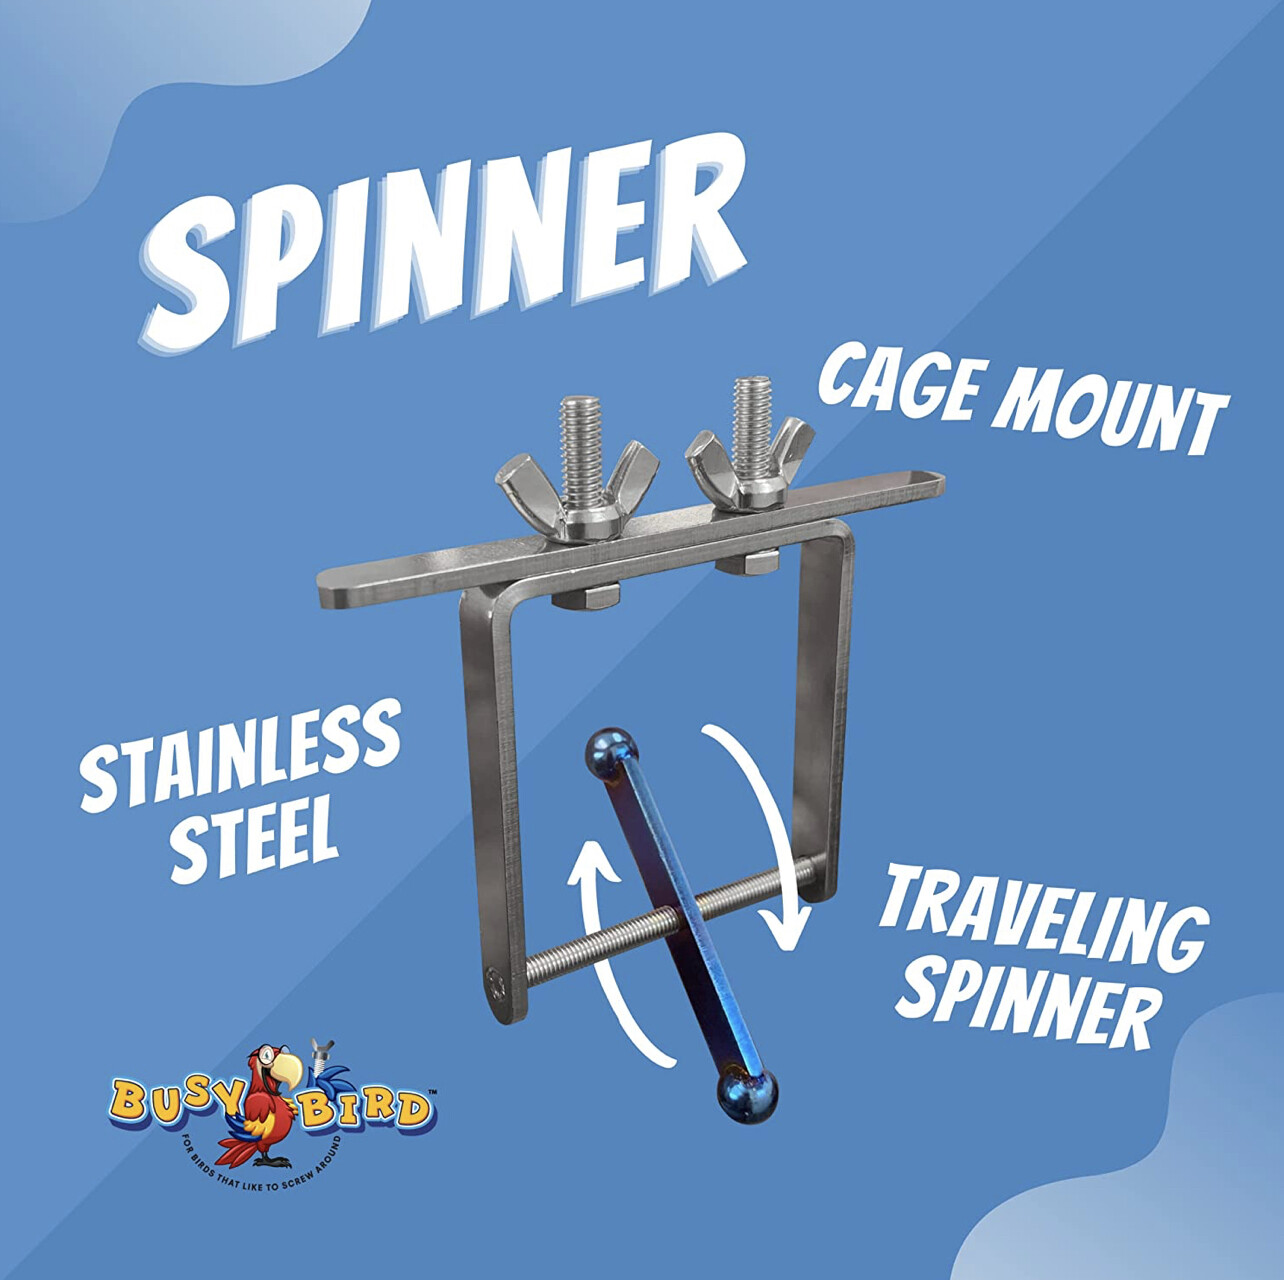 The Busy Spinner - in Blue / Gold Flame Color - Plenty of dizzying fun with the stainless steel spinner. The spinner travels on a threaded rod back and forth. Comes in two different colors.